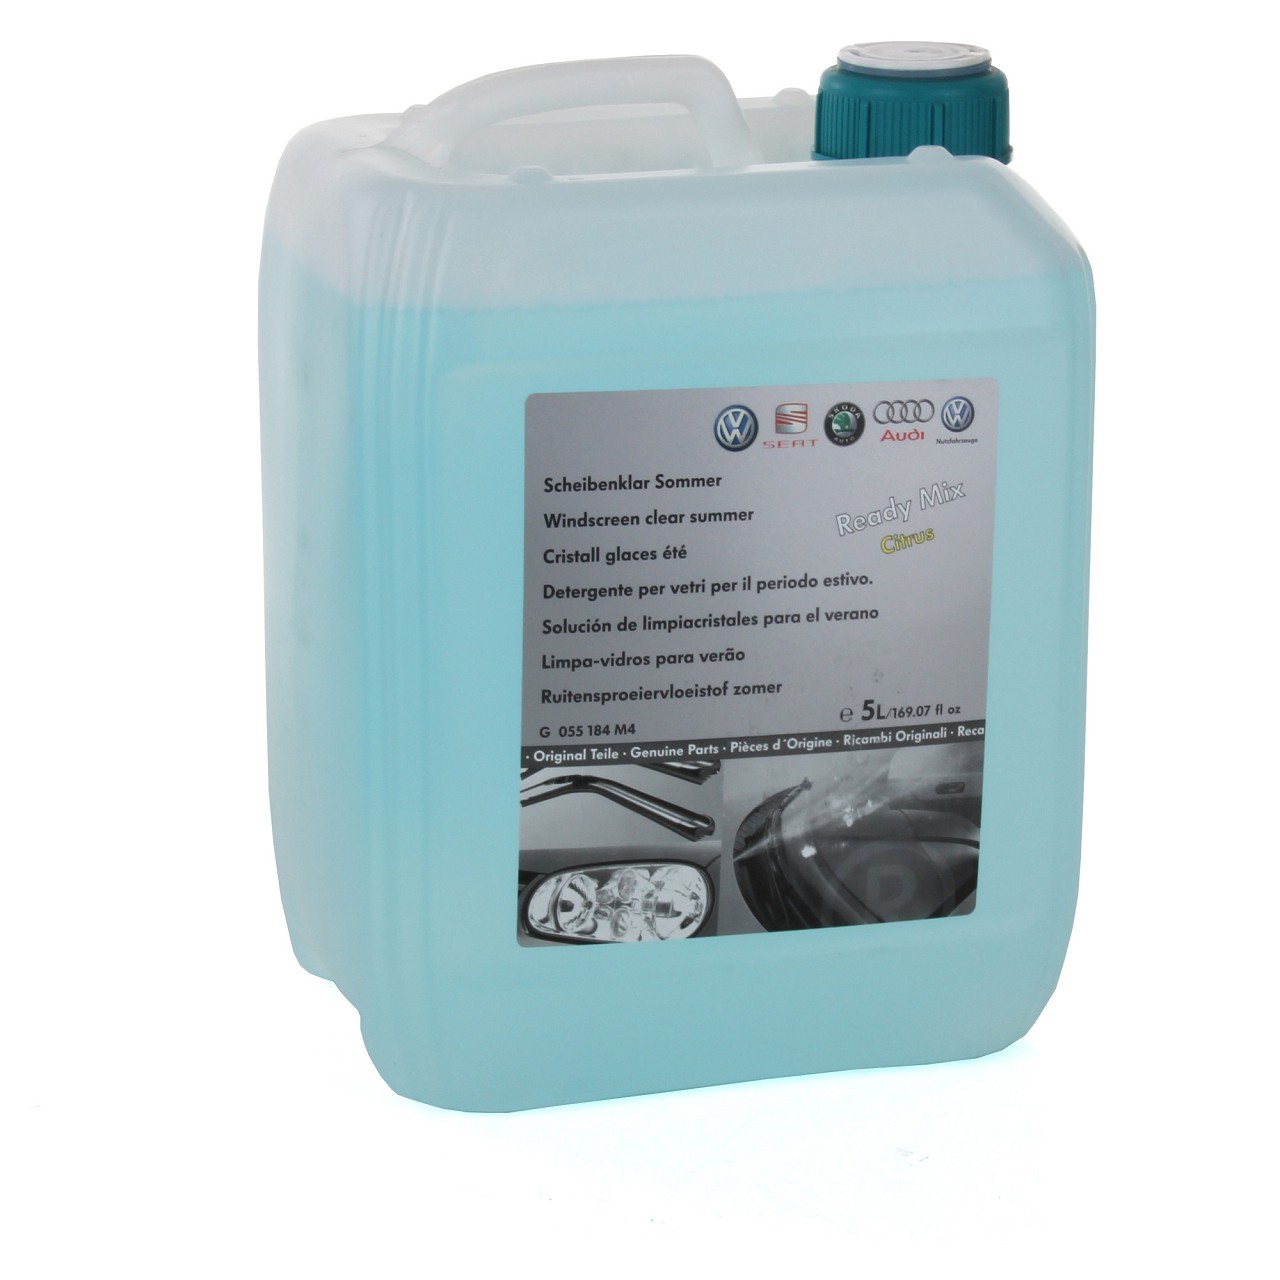 Original windscreen cleaner for your vehicle